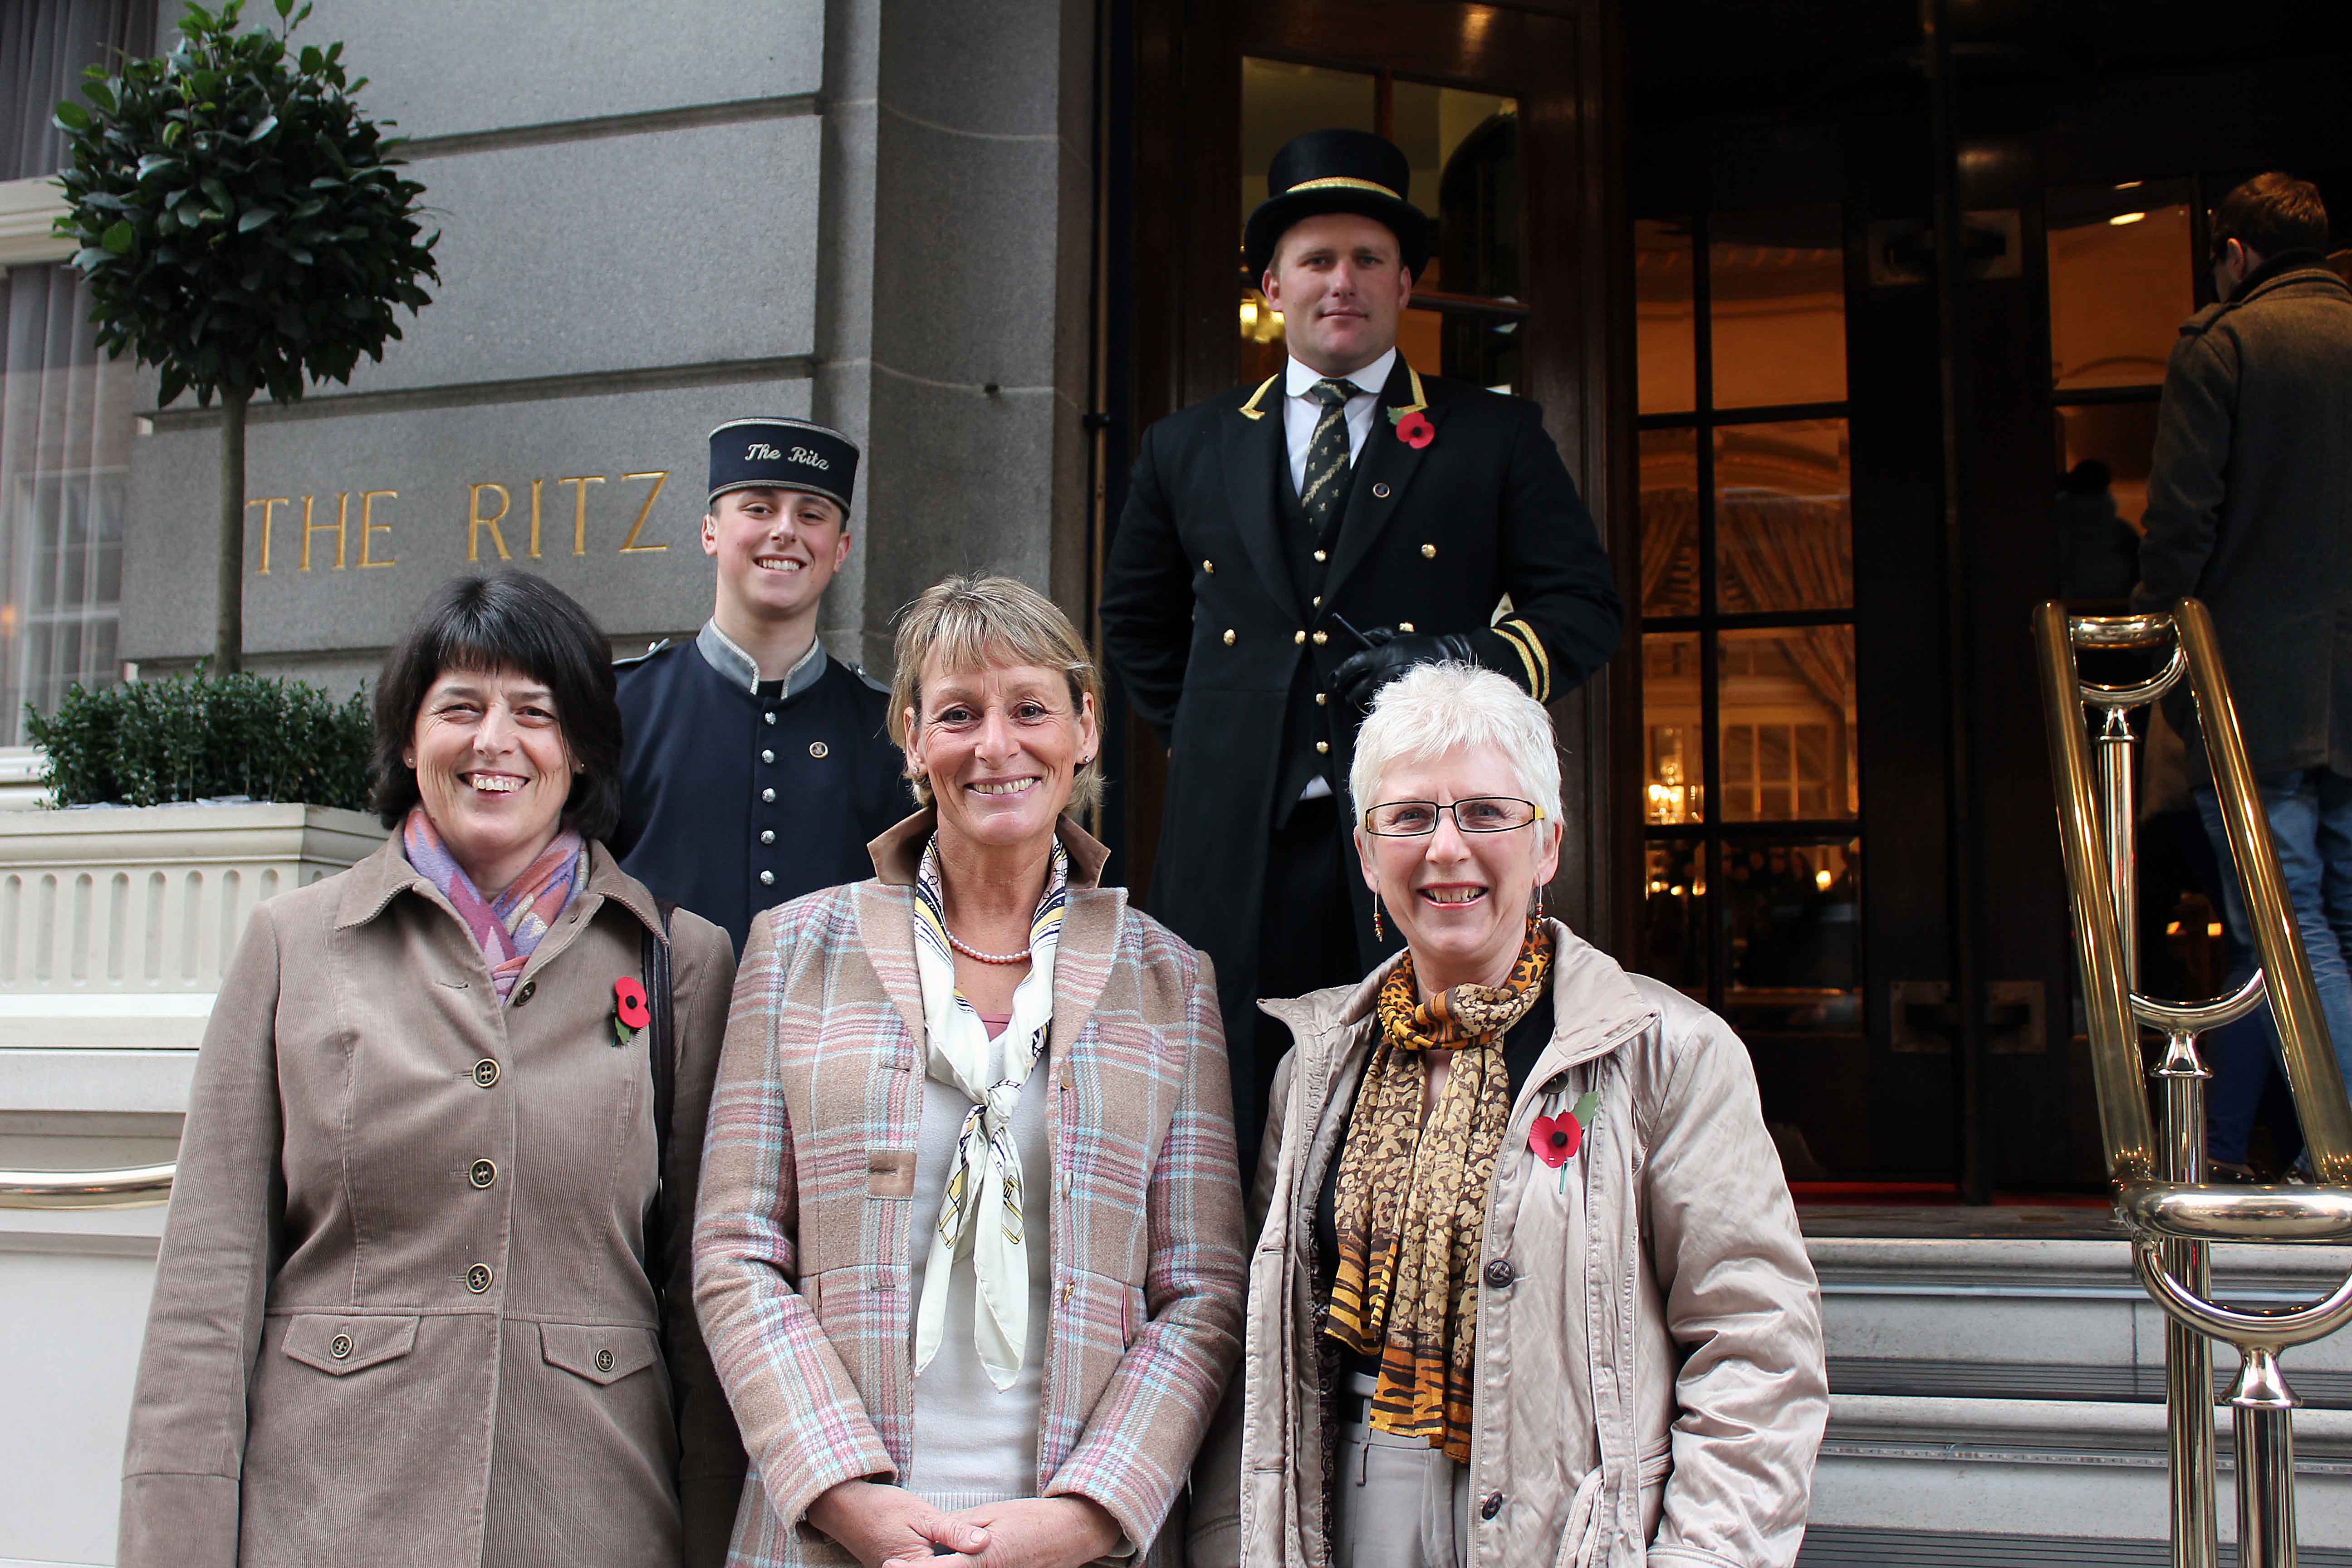 Rosemary with her guest and the legendary Mary King outside the Ritz Hotel in London